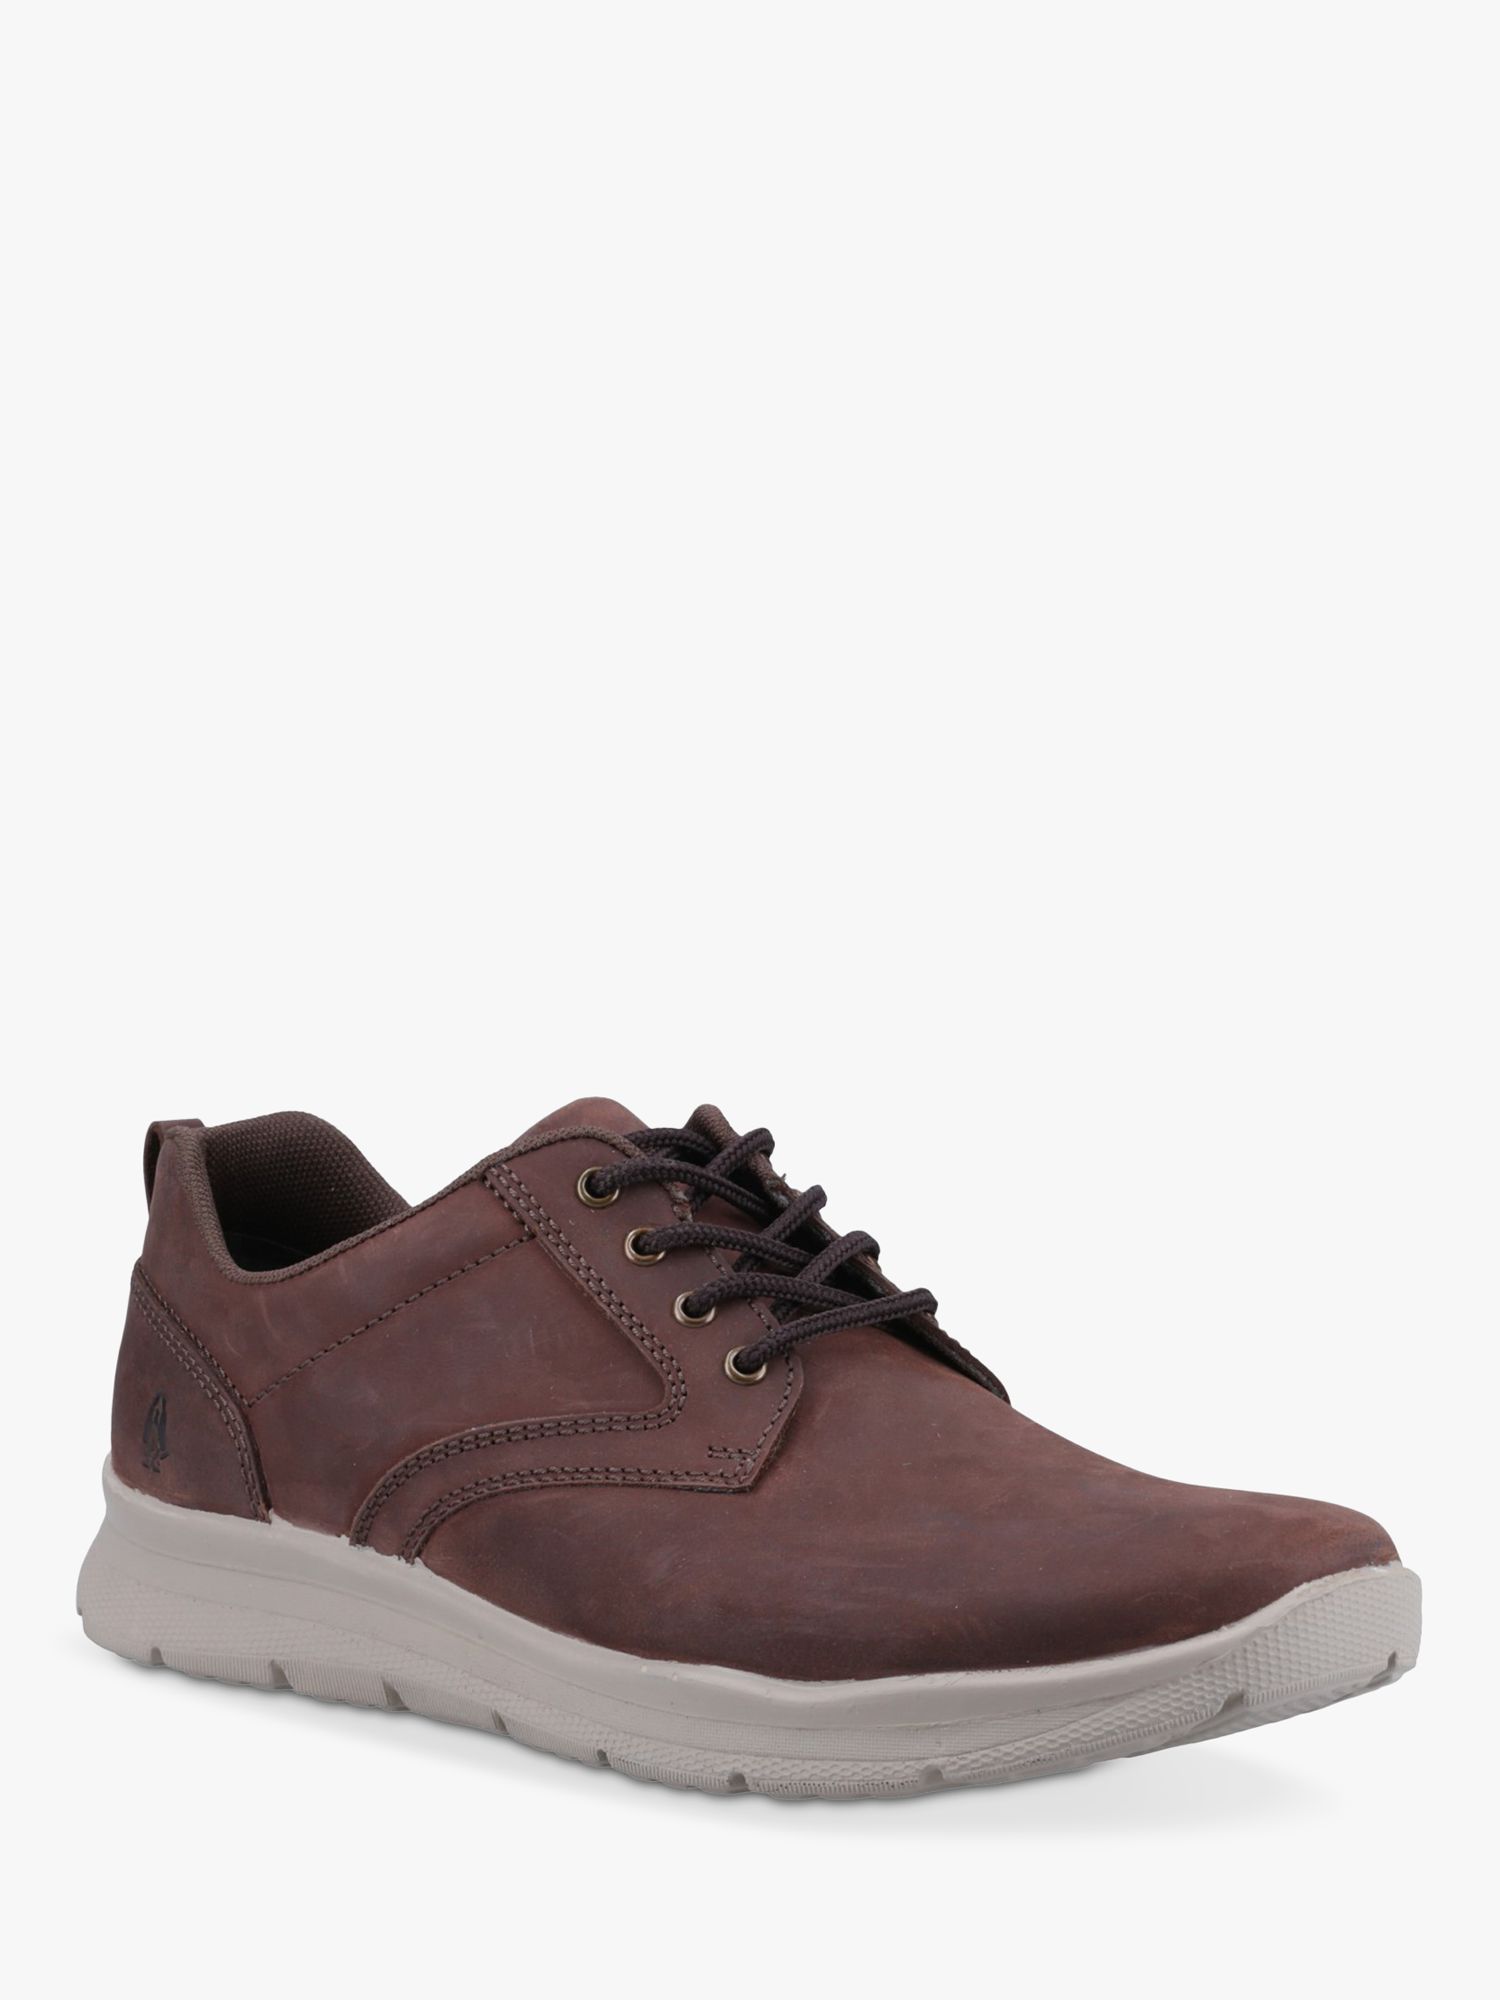 Buy Hush Puppies Fergus Leather Trainers Online at johnlewis.com